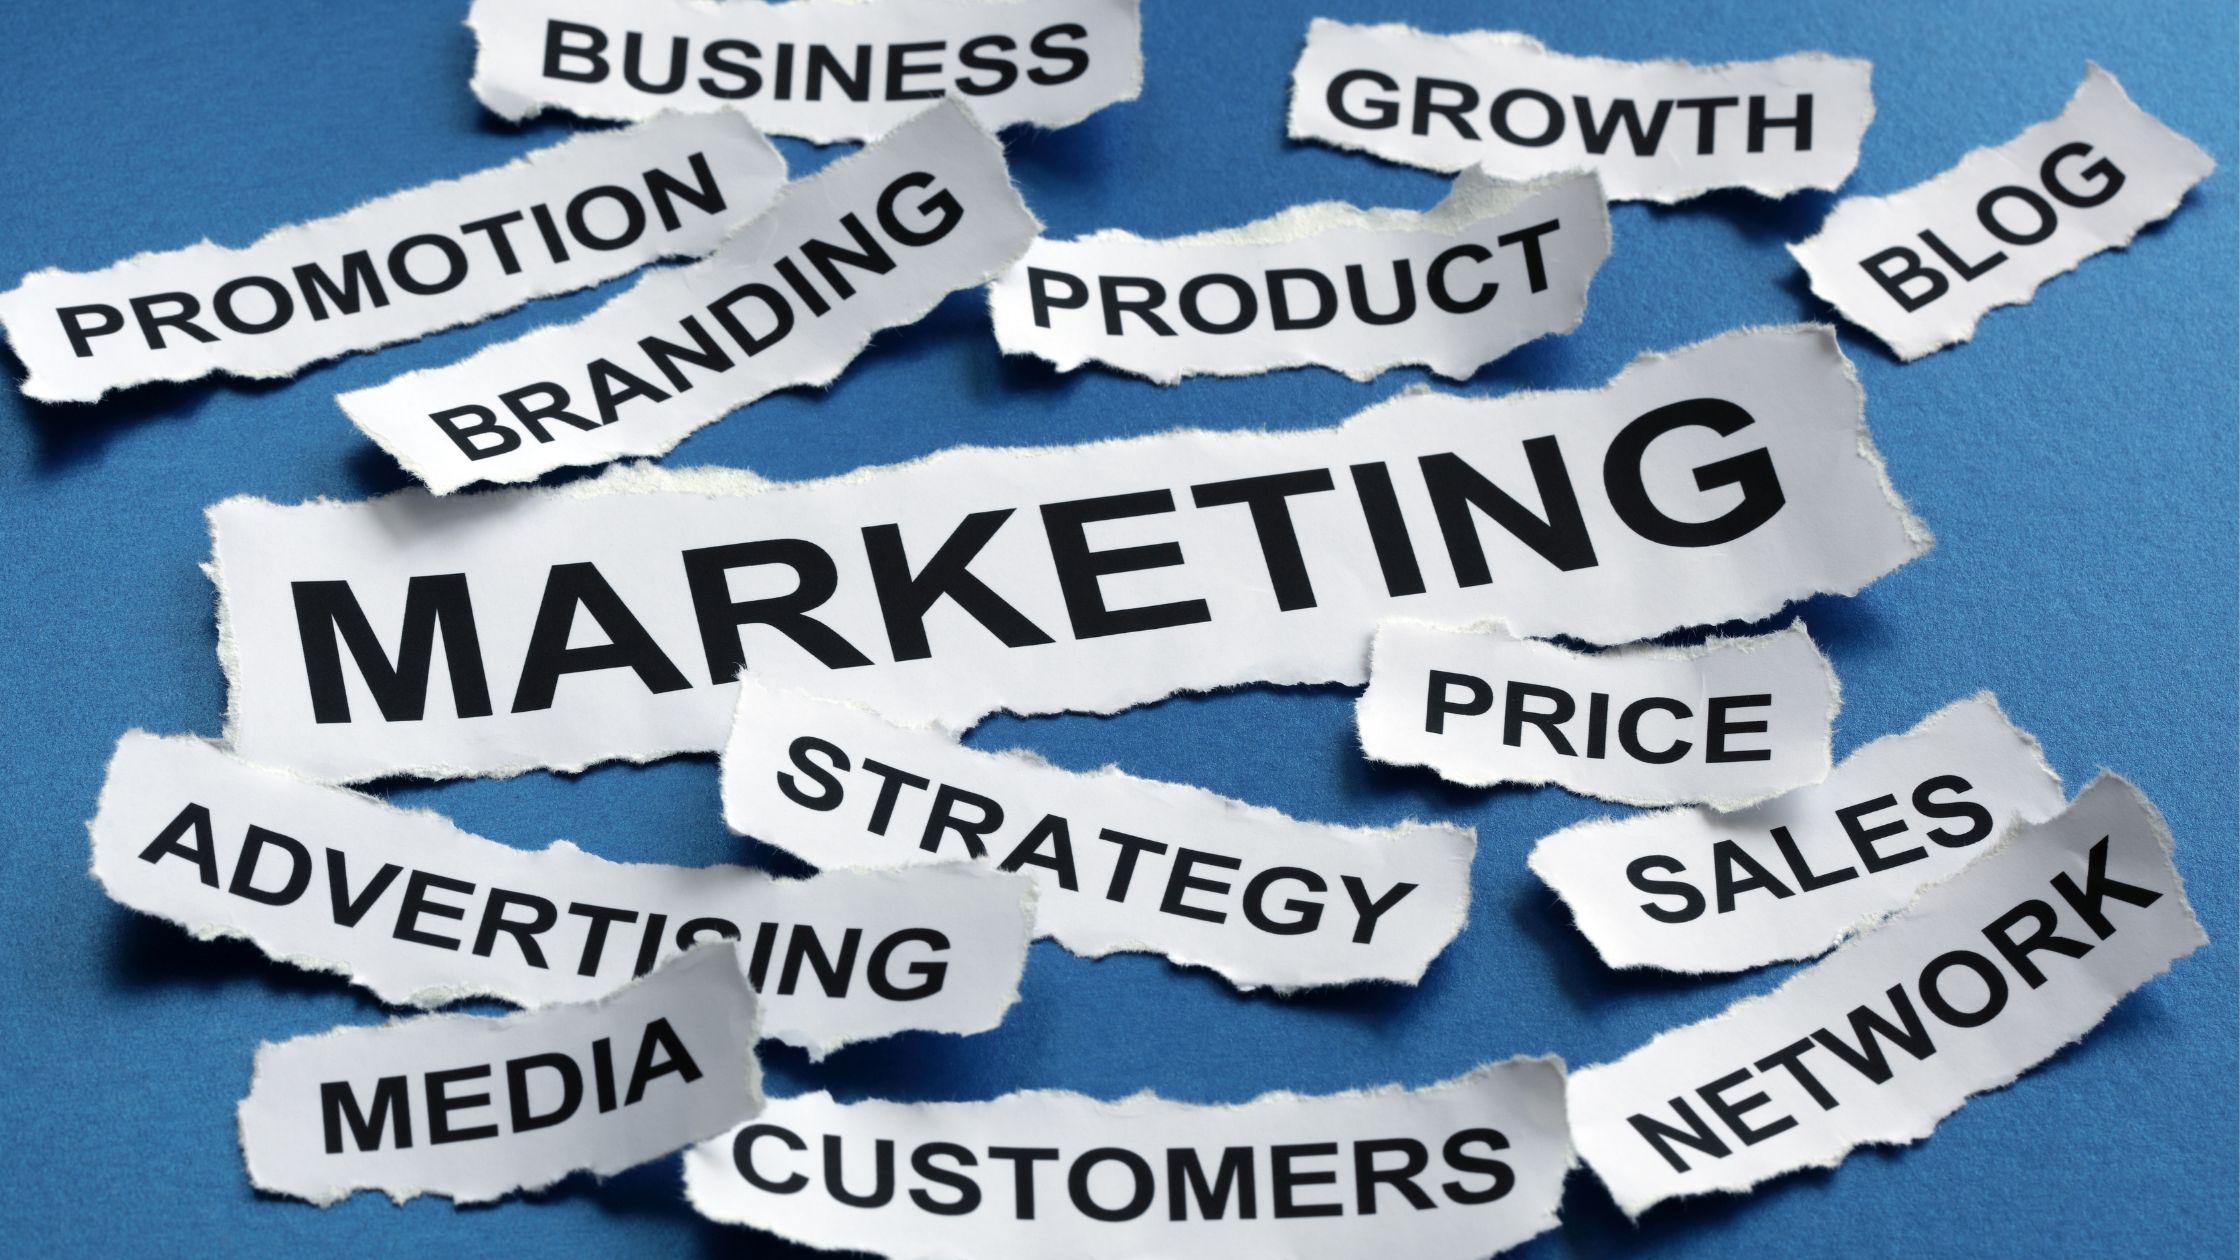 4ps and 4cs of Marketing